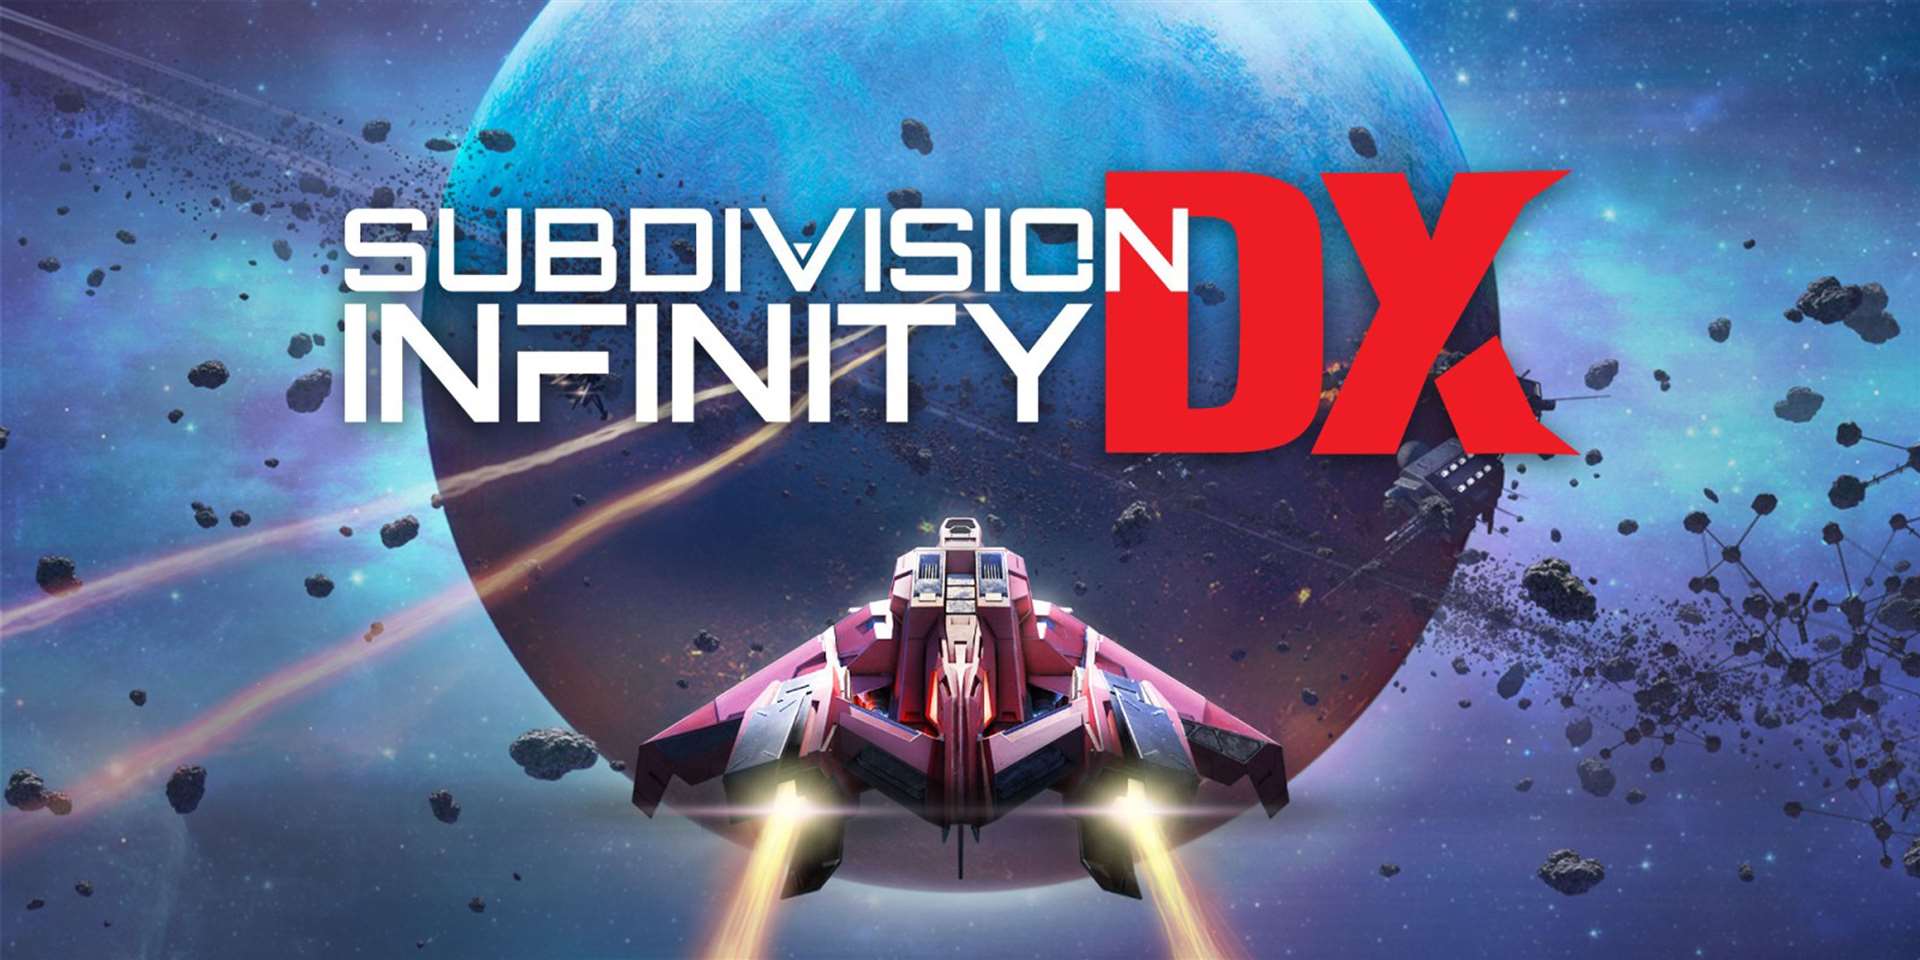 Subdivision Infinity DX. Picture: Handout/PA